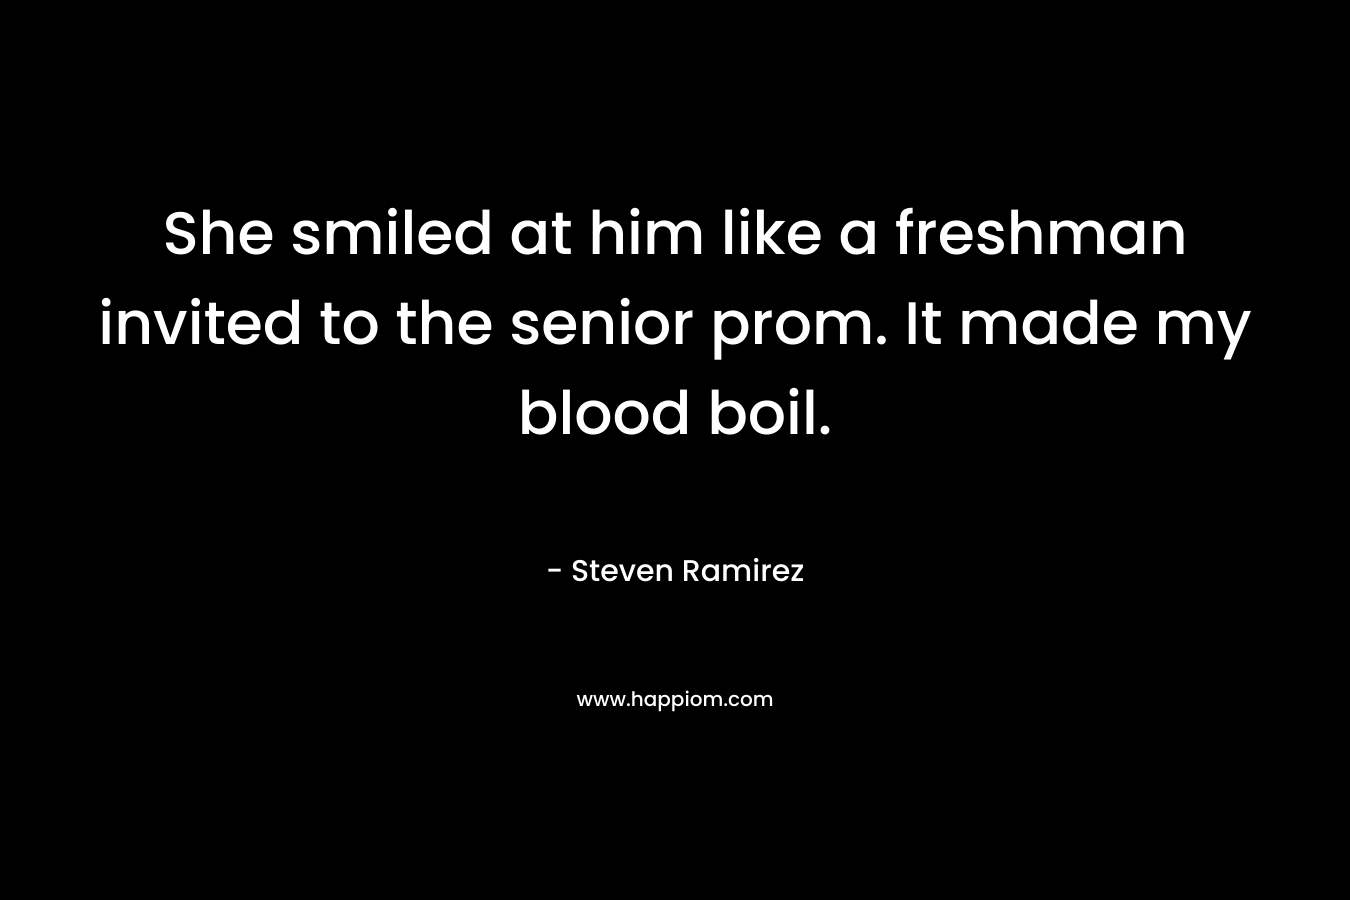 She smiled at him like a freshman invited to the senior prom. It made my blood boil. – Steven Ramirez